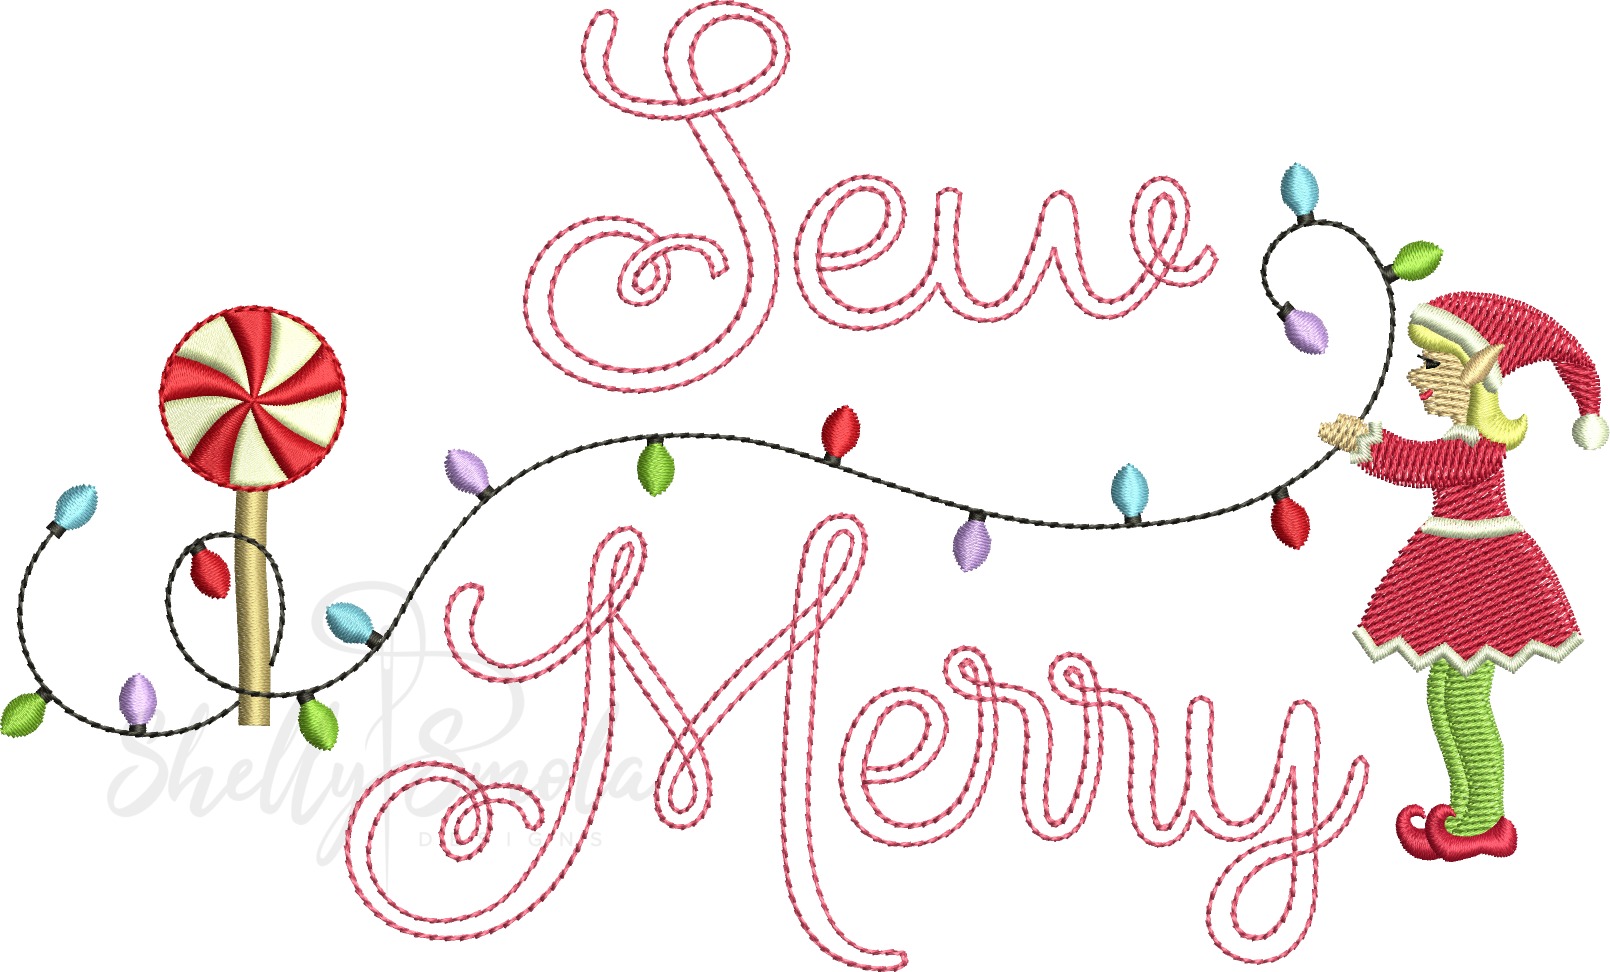 Sew Very Merry by Shelly Smola